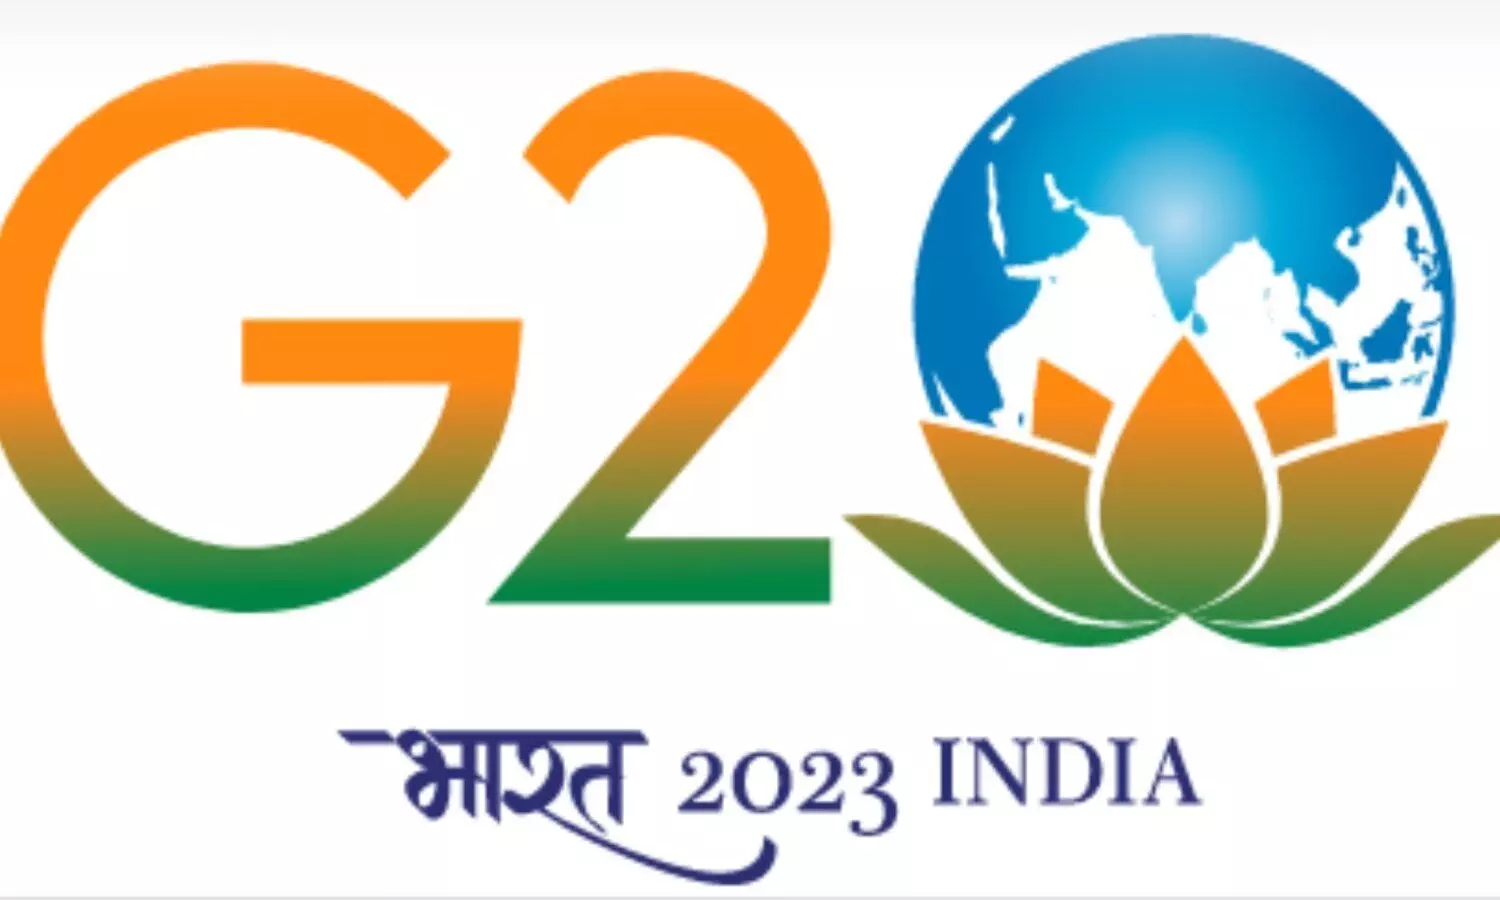 Lucknow is ready for G 20